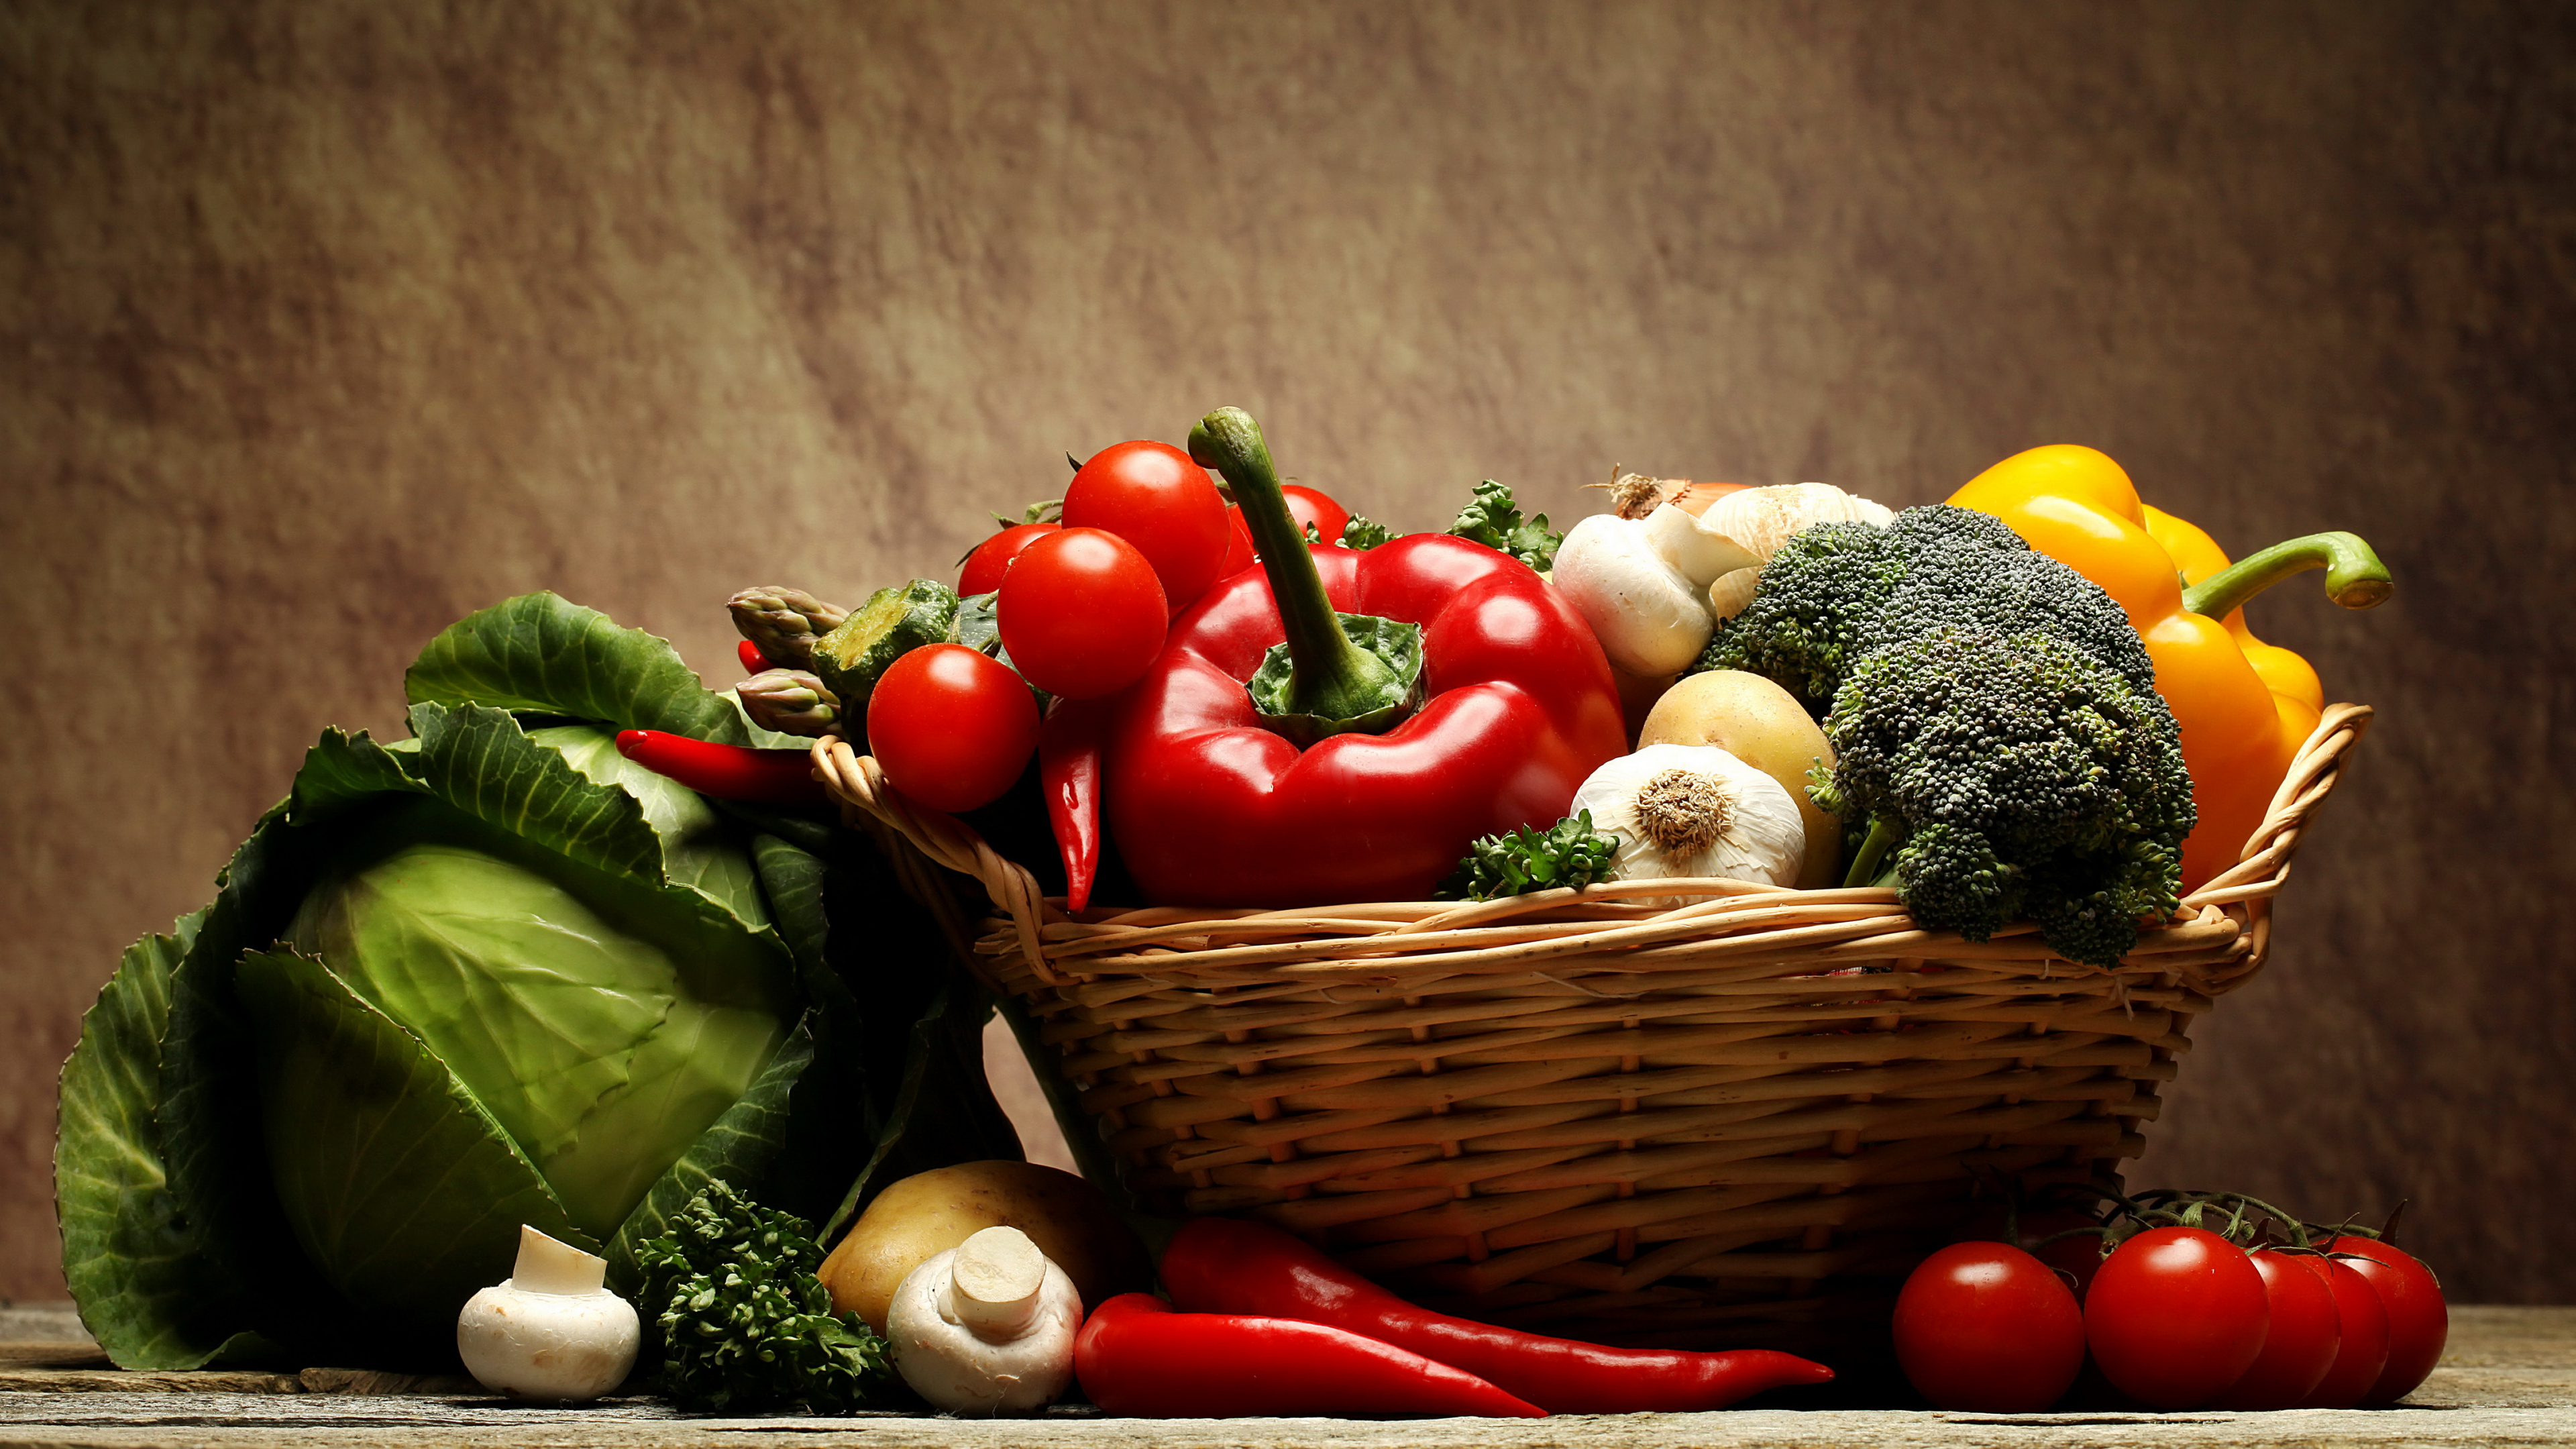 Red Tomatoes and Green Vegetable on Brown Woven Basket. Wallpaper in 3840x2160 Resolution